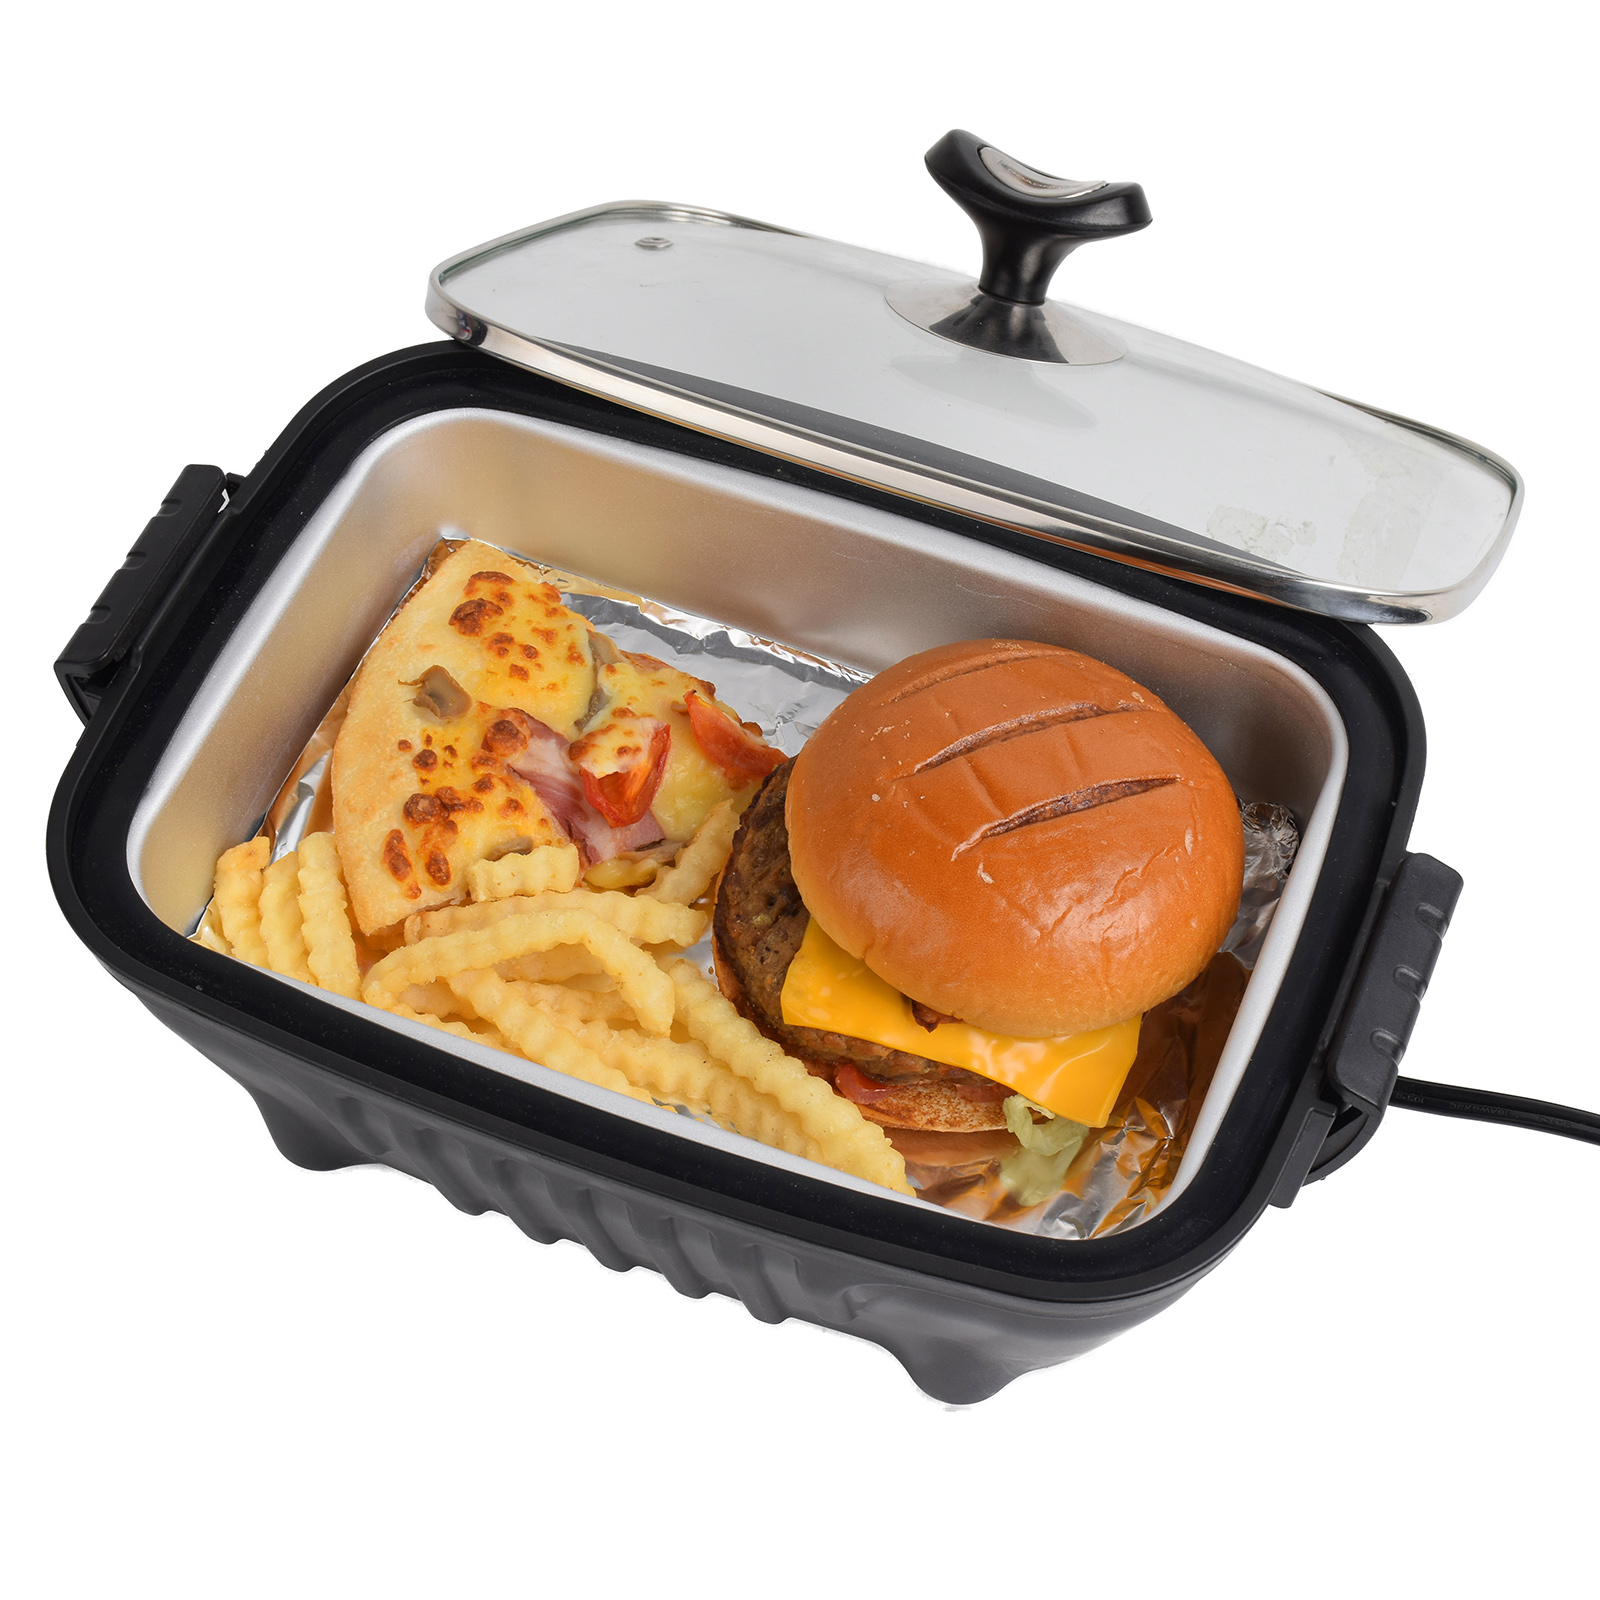 DC12V Portable Fast Heating Sandwich Maker Mini Toaster and